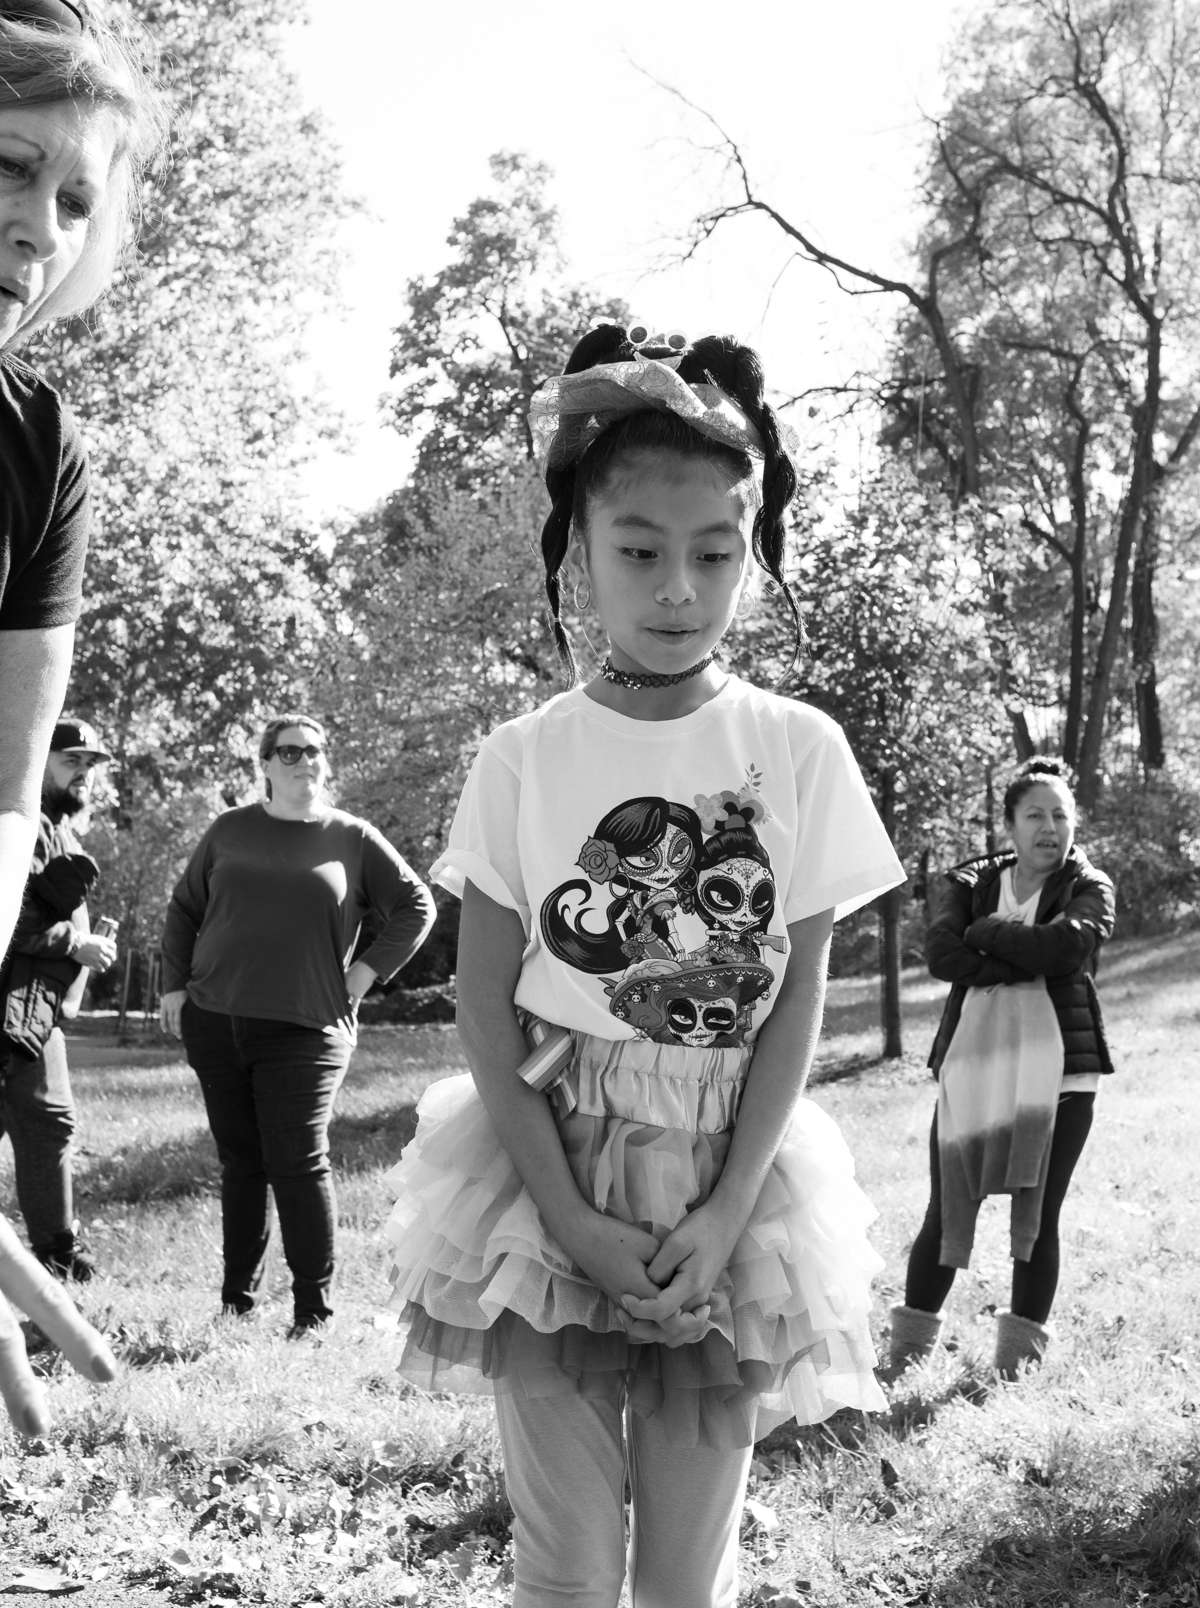 A girl wearing a T-shirt and a skirt stands A young girl wearing a costume walks at the annual Come as You Art event on the Karl Stirner Arts Trail.